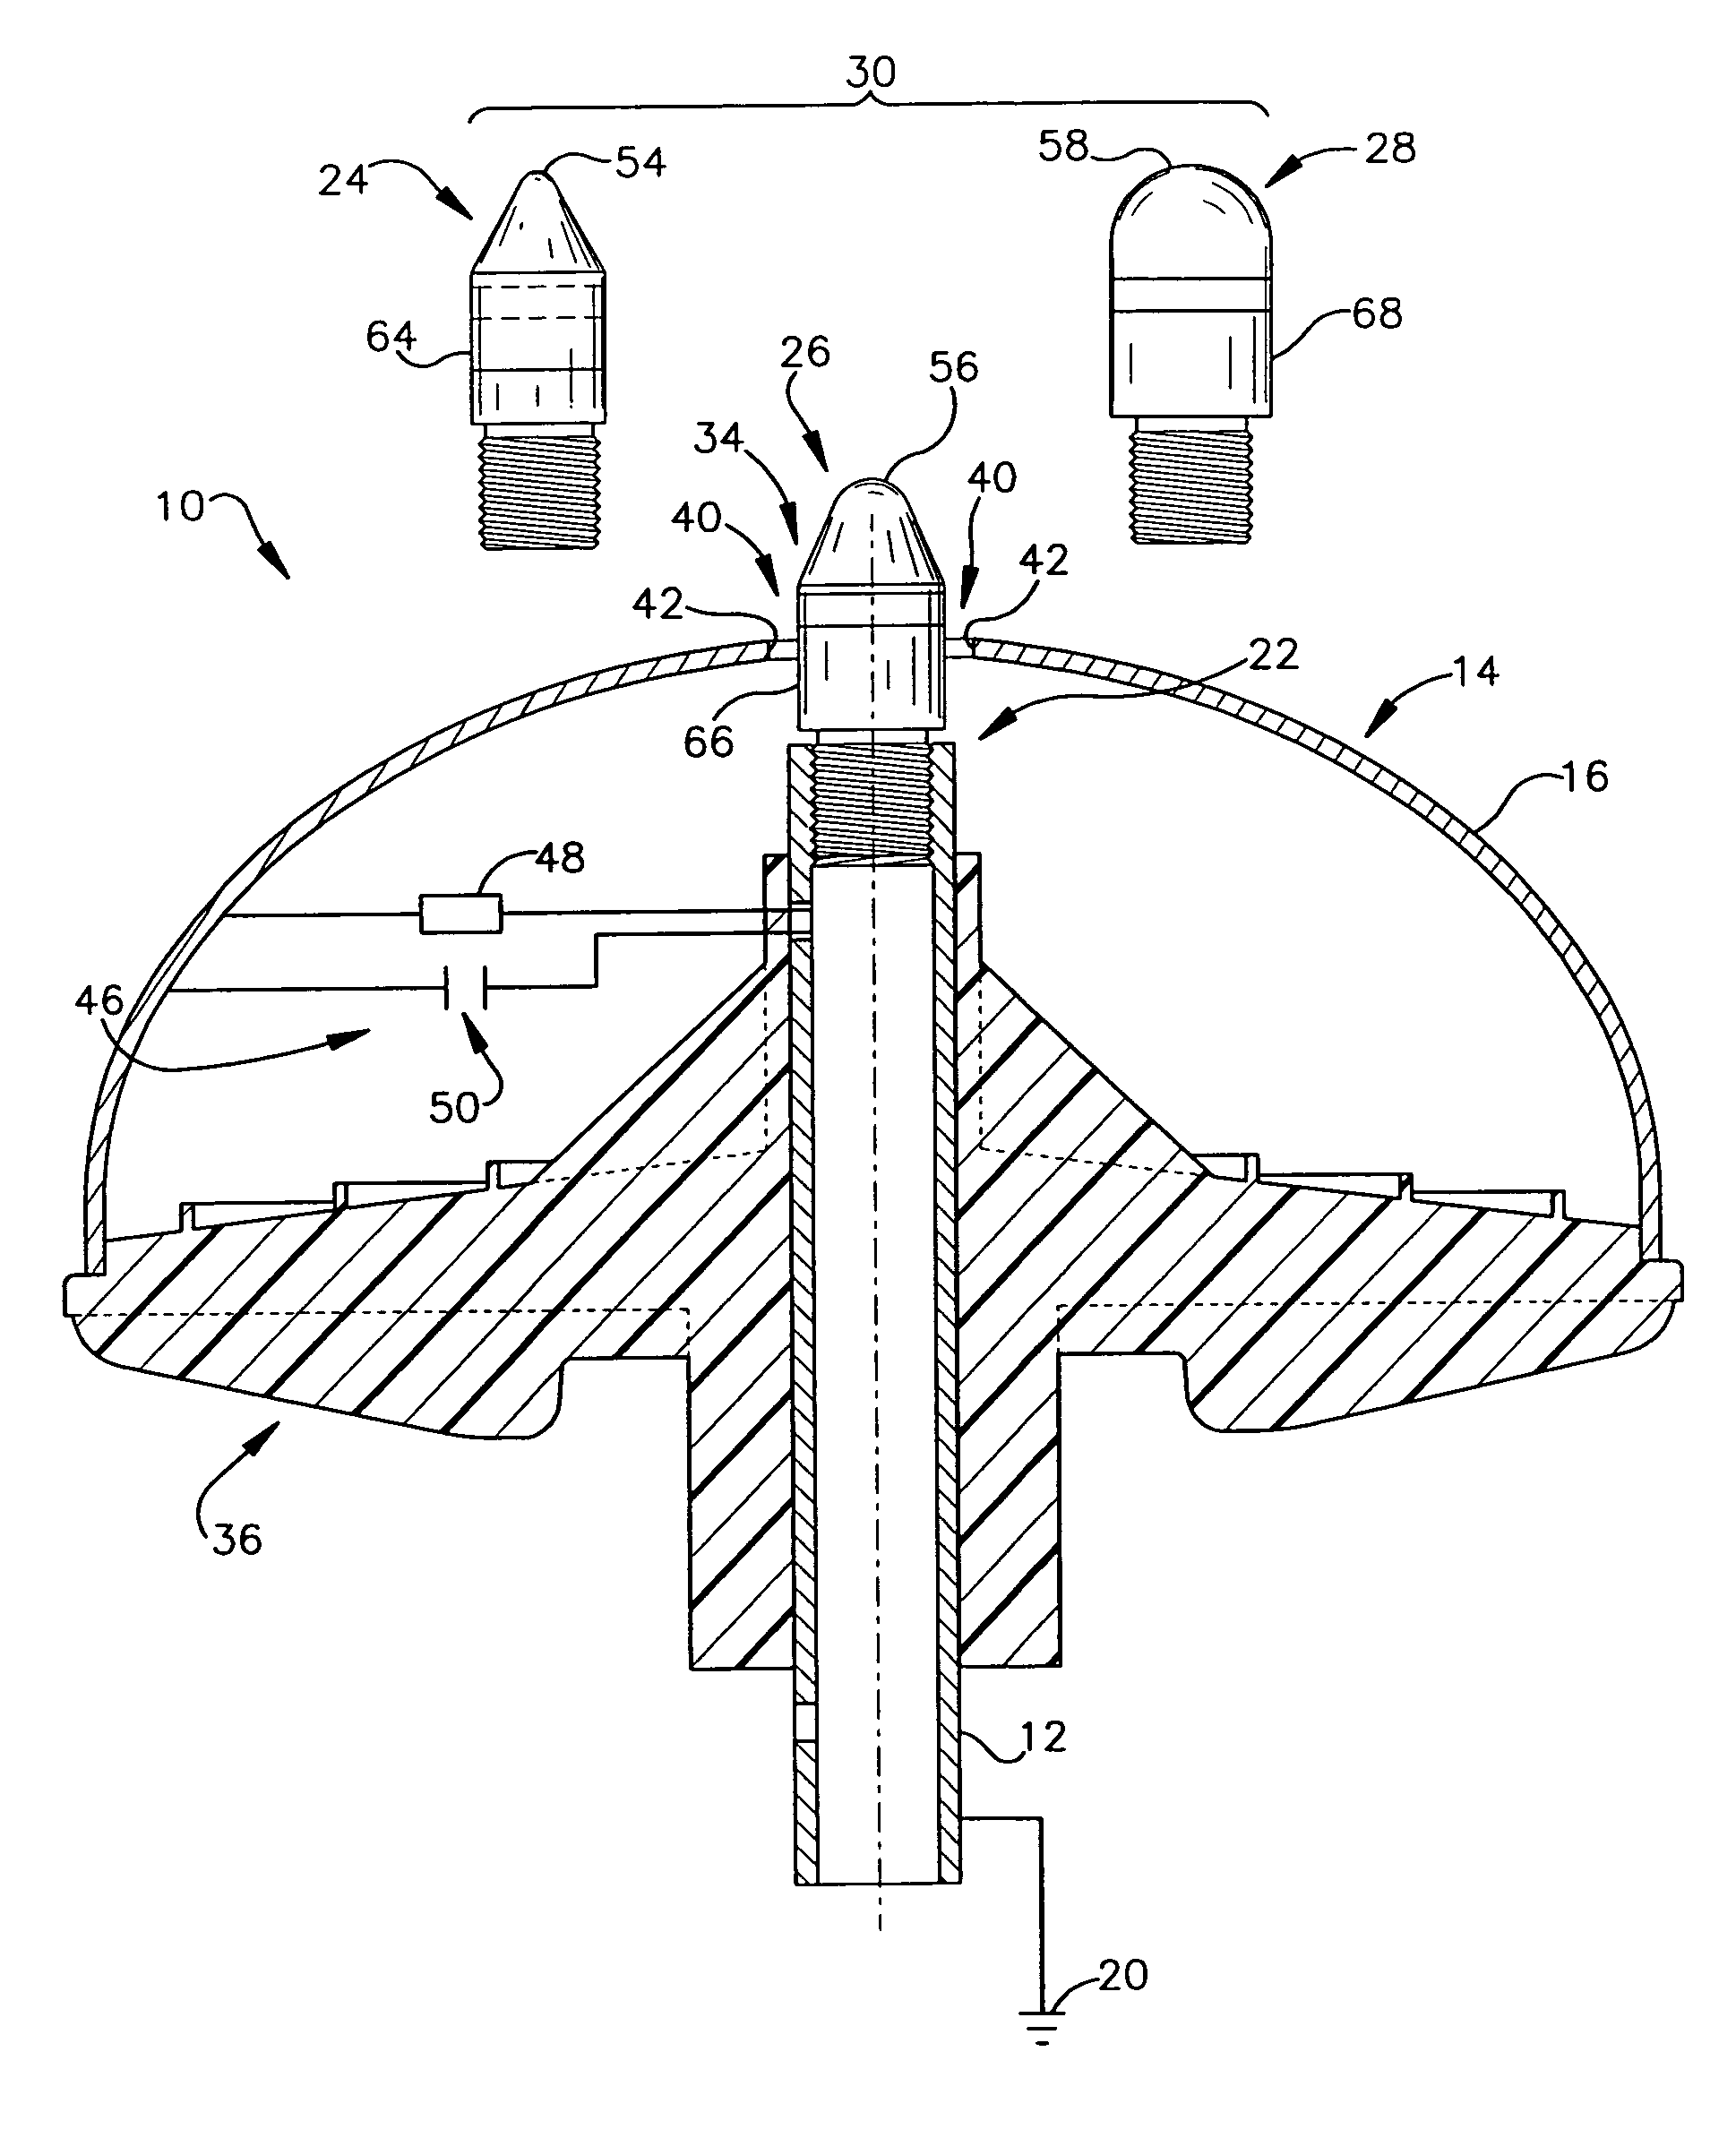 Lightning protection device and method